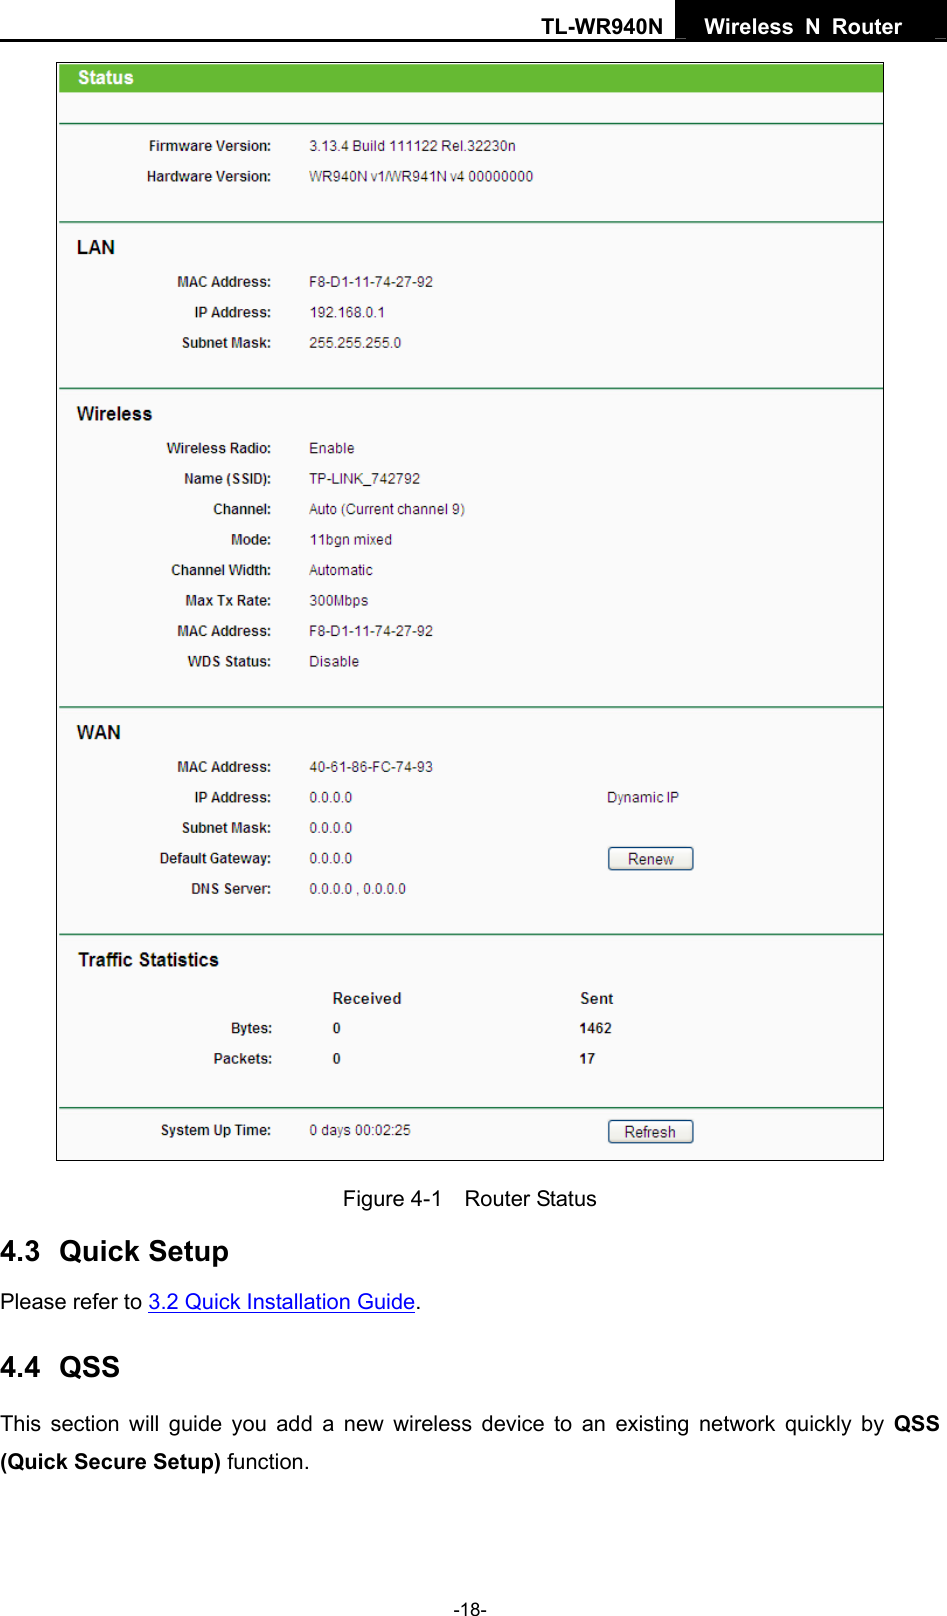 TL-WR940N  Wireless N Router    Figure 4-1  Router Status 4.3  Quick Setup Please refer to 3.2 Quick Installation Guide. 4.4  QSS This section will guide you add a new wireless device to an existing network quickly by QSS (Quick Secure Setup) function.   -18- 